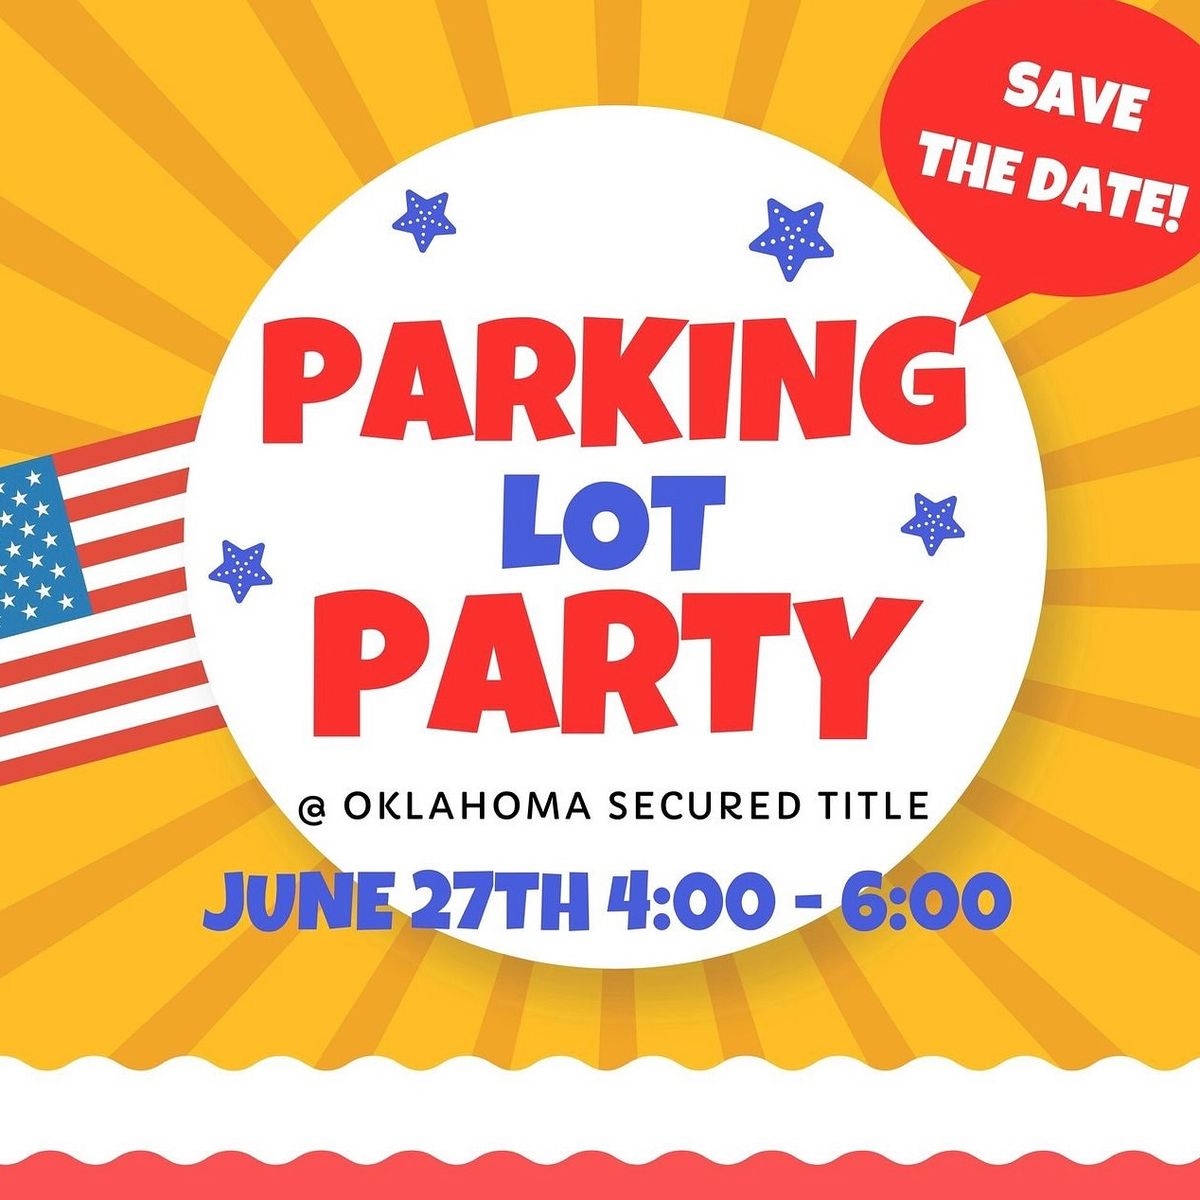 Oklahoma Secured Title Parking Lot Party